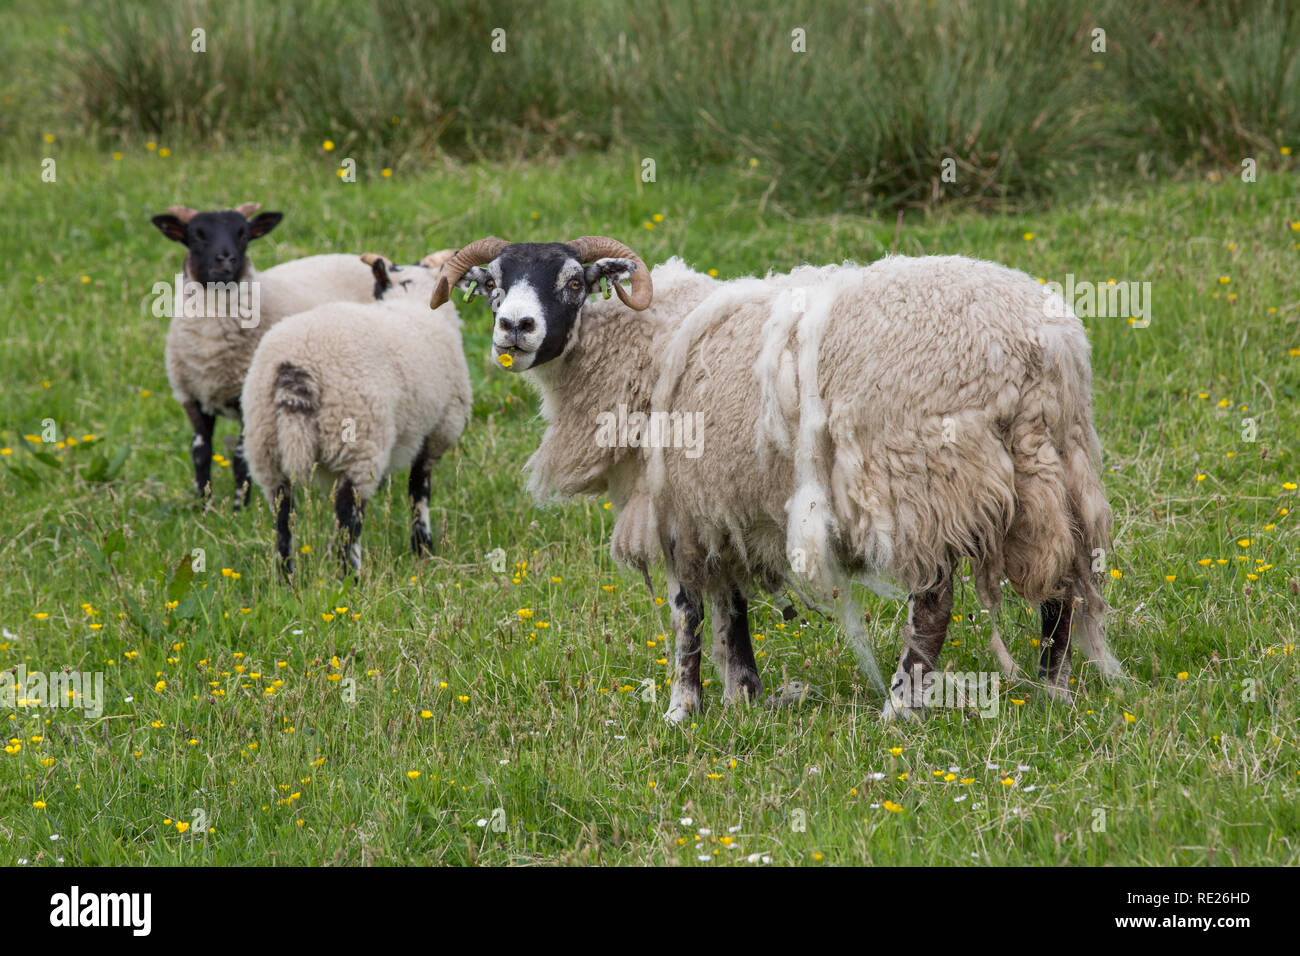 Scottish Blackface Ewe with well-grown lambs. Hill breed. Buttercup (Ranunculus sp. ), flower in mouth. Shedding fleece naturally. Tails of both ewe and lambs intact, ie not docked. Stock Photo